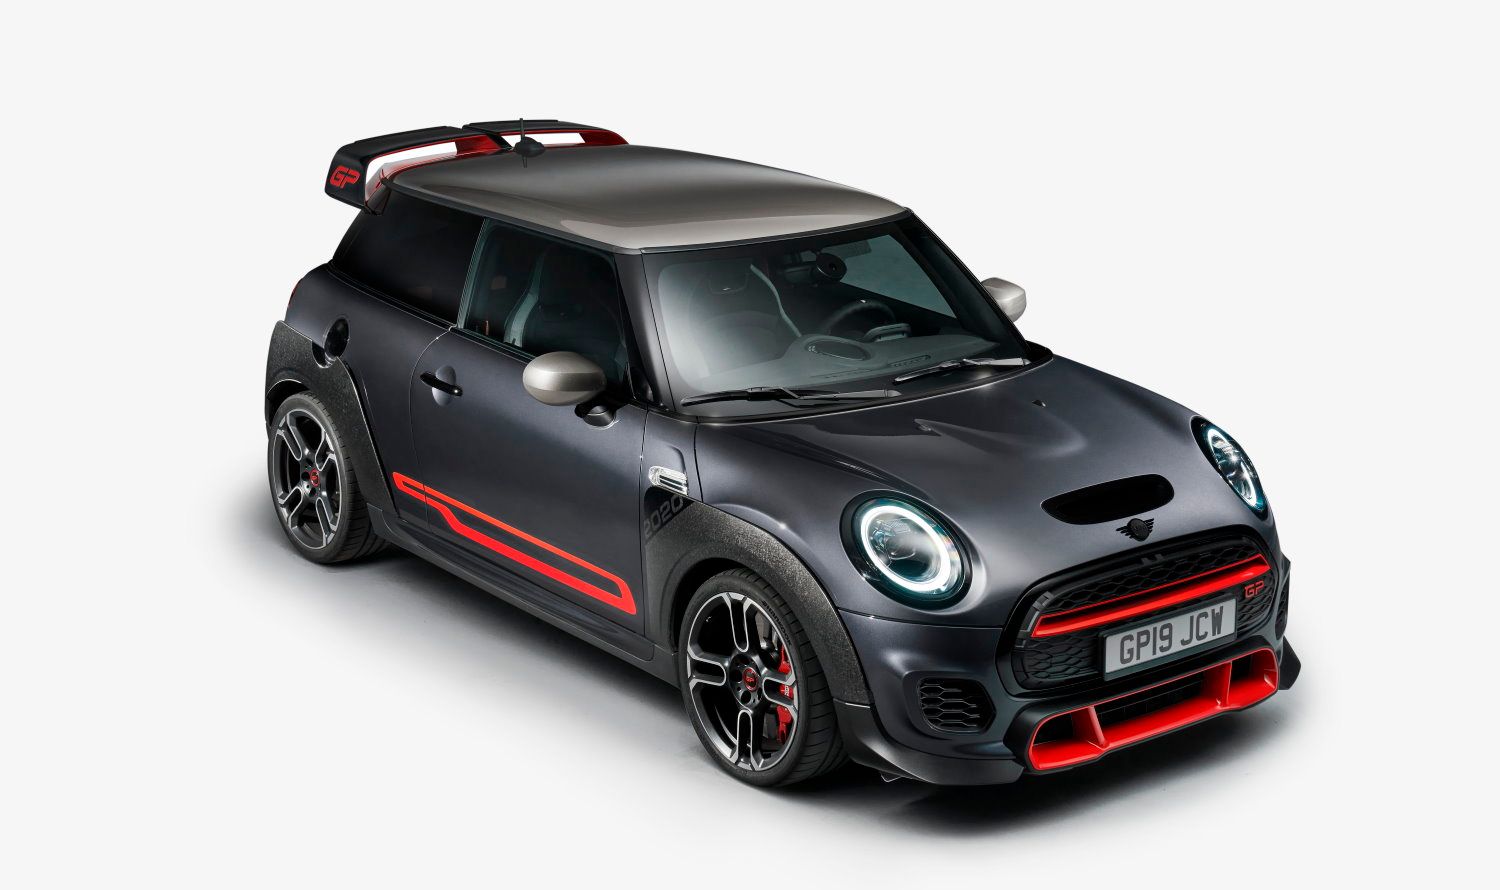 2020 Mini John Cooper Works GP Is The Fastest Mini Ever Made With Over 300 HP